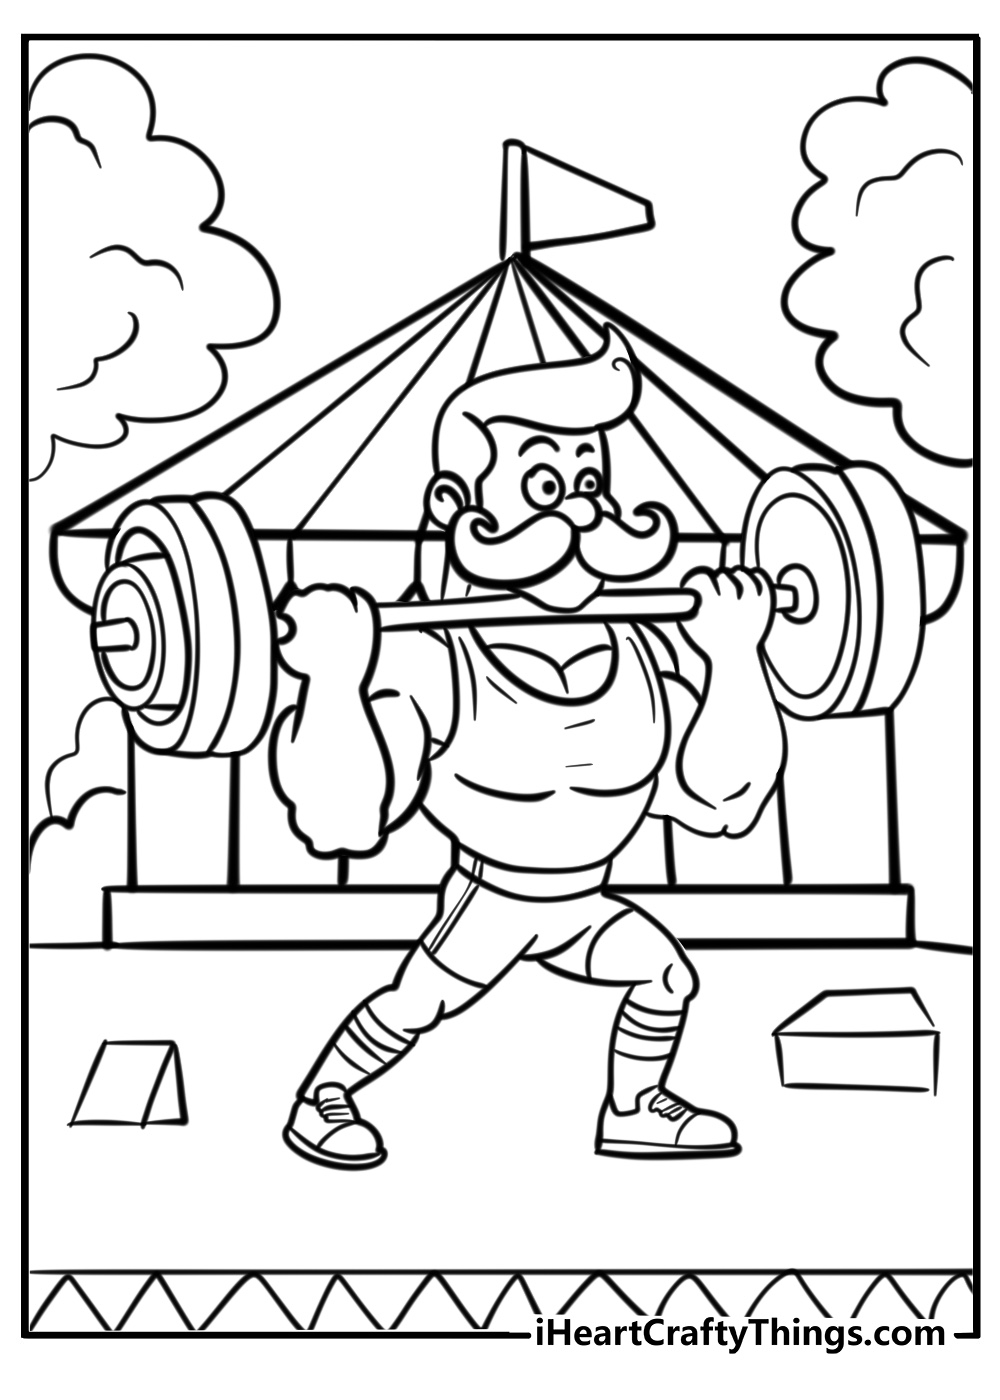 Circus coloring page of strongman with mustache lifting weights